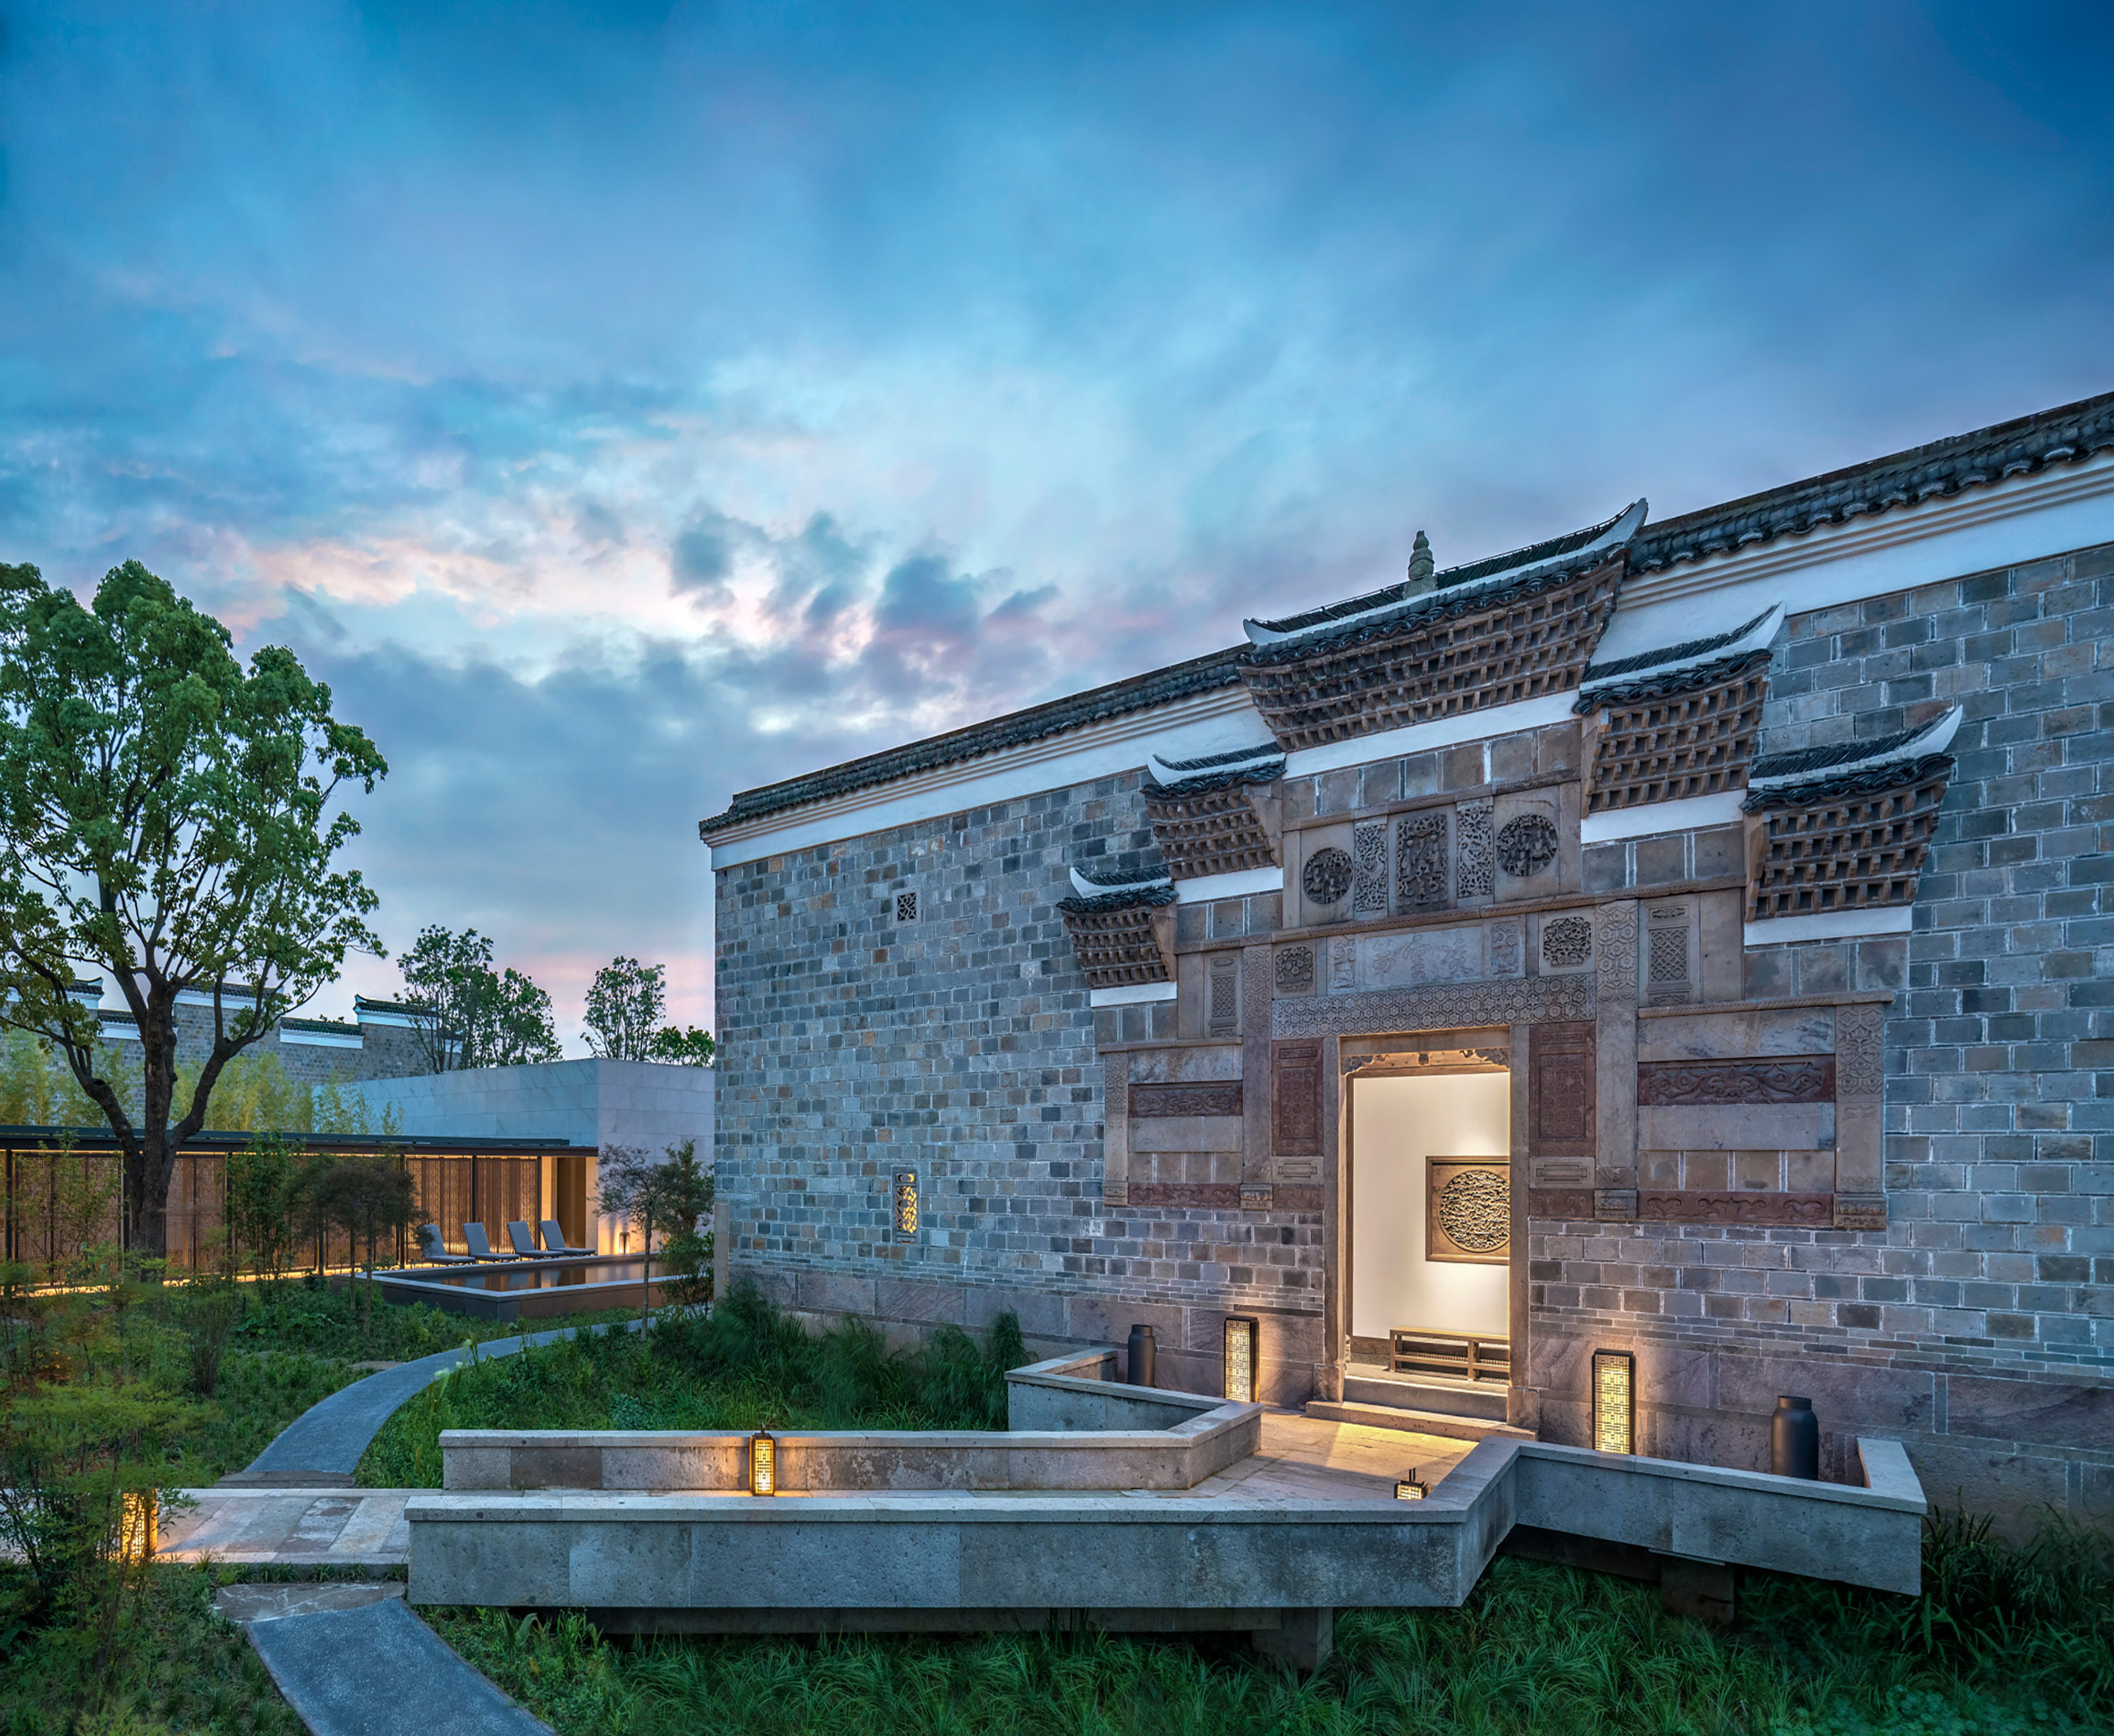 The Amanyangyun won the award for Hotel of the Year at the 2019 AHEAD Asia awards